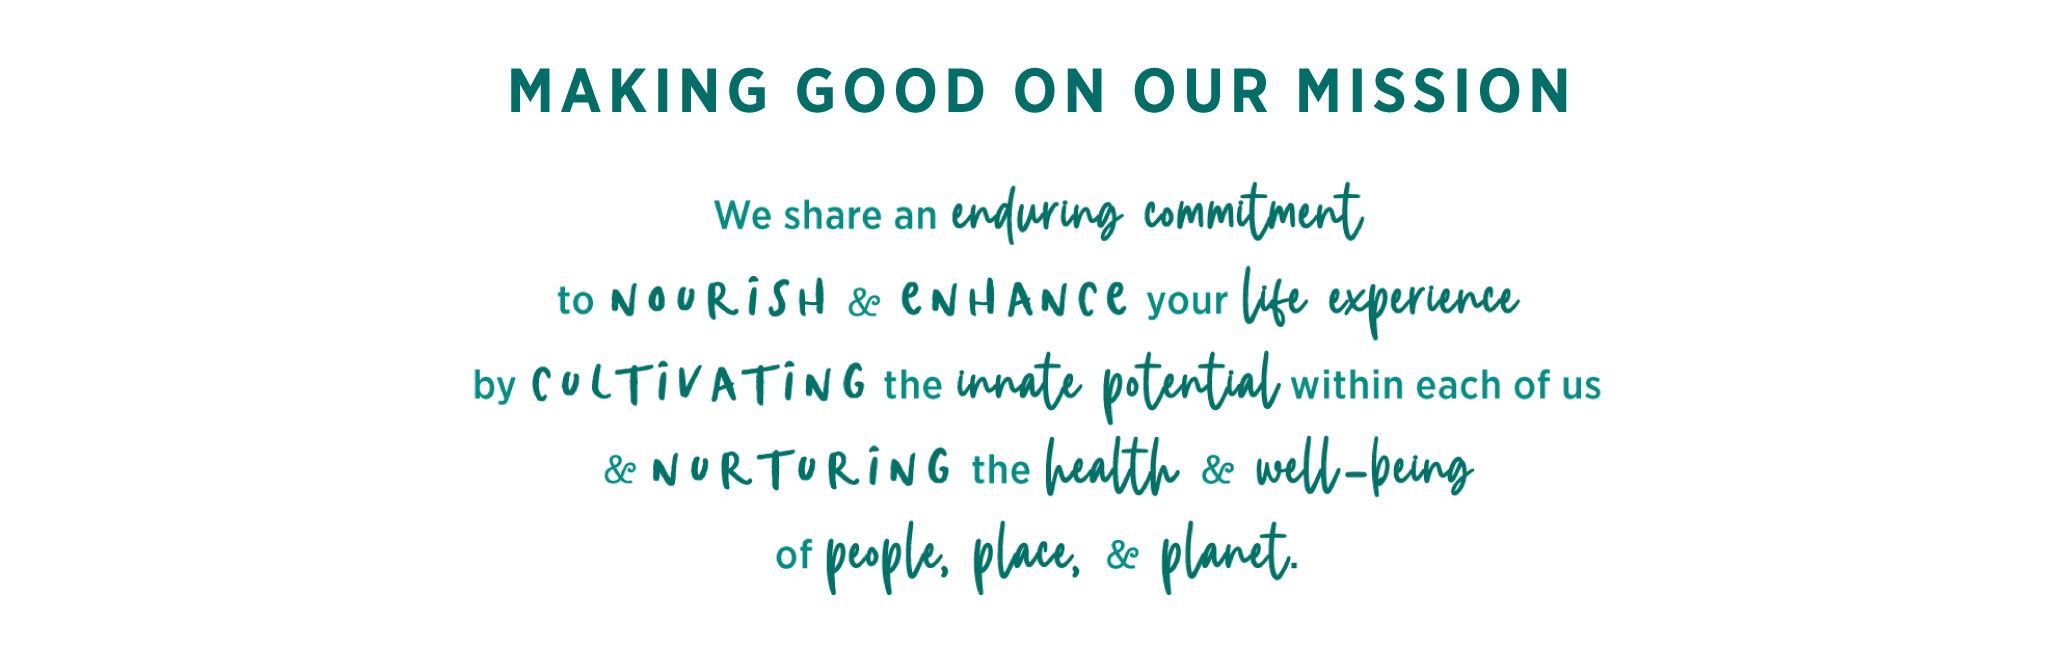 Making Good on Our Mission: “We share an enduring commitment to nourish and enhance your life experience by cultivating the innate potential within each of us, and nurturing the health and well-being of people, place, and planet.”